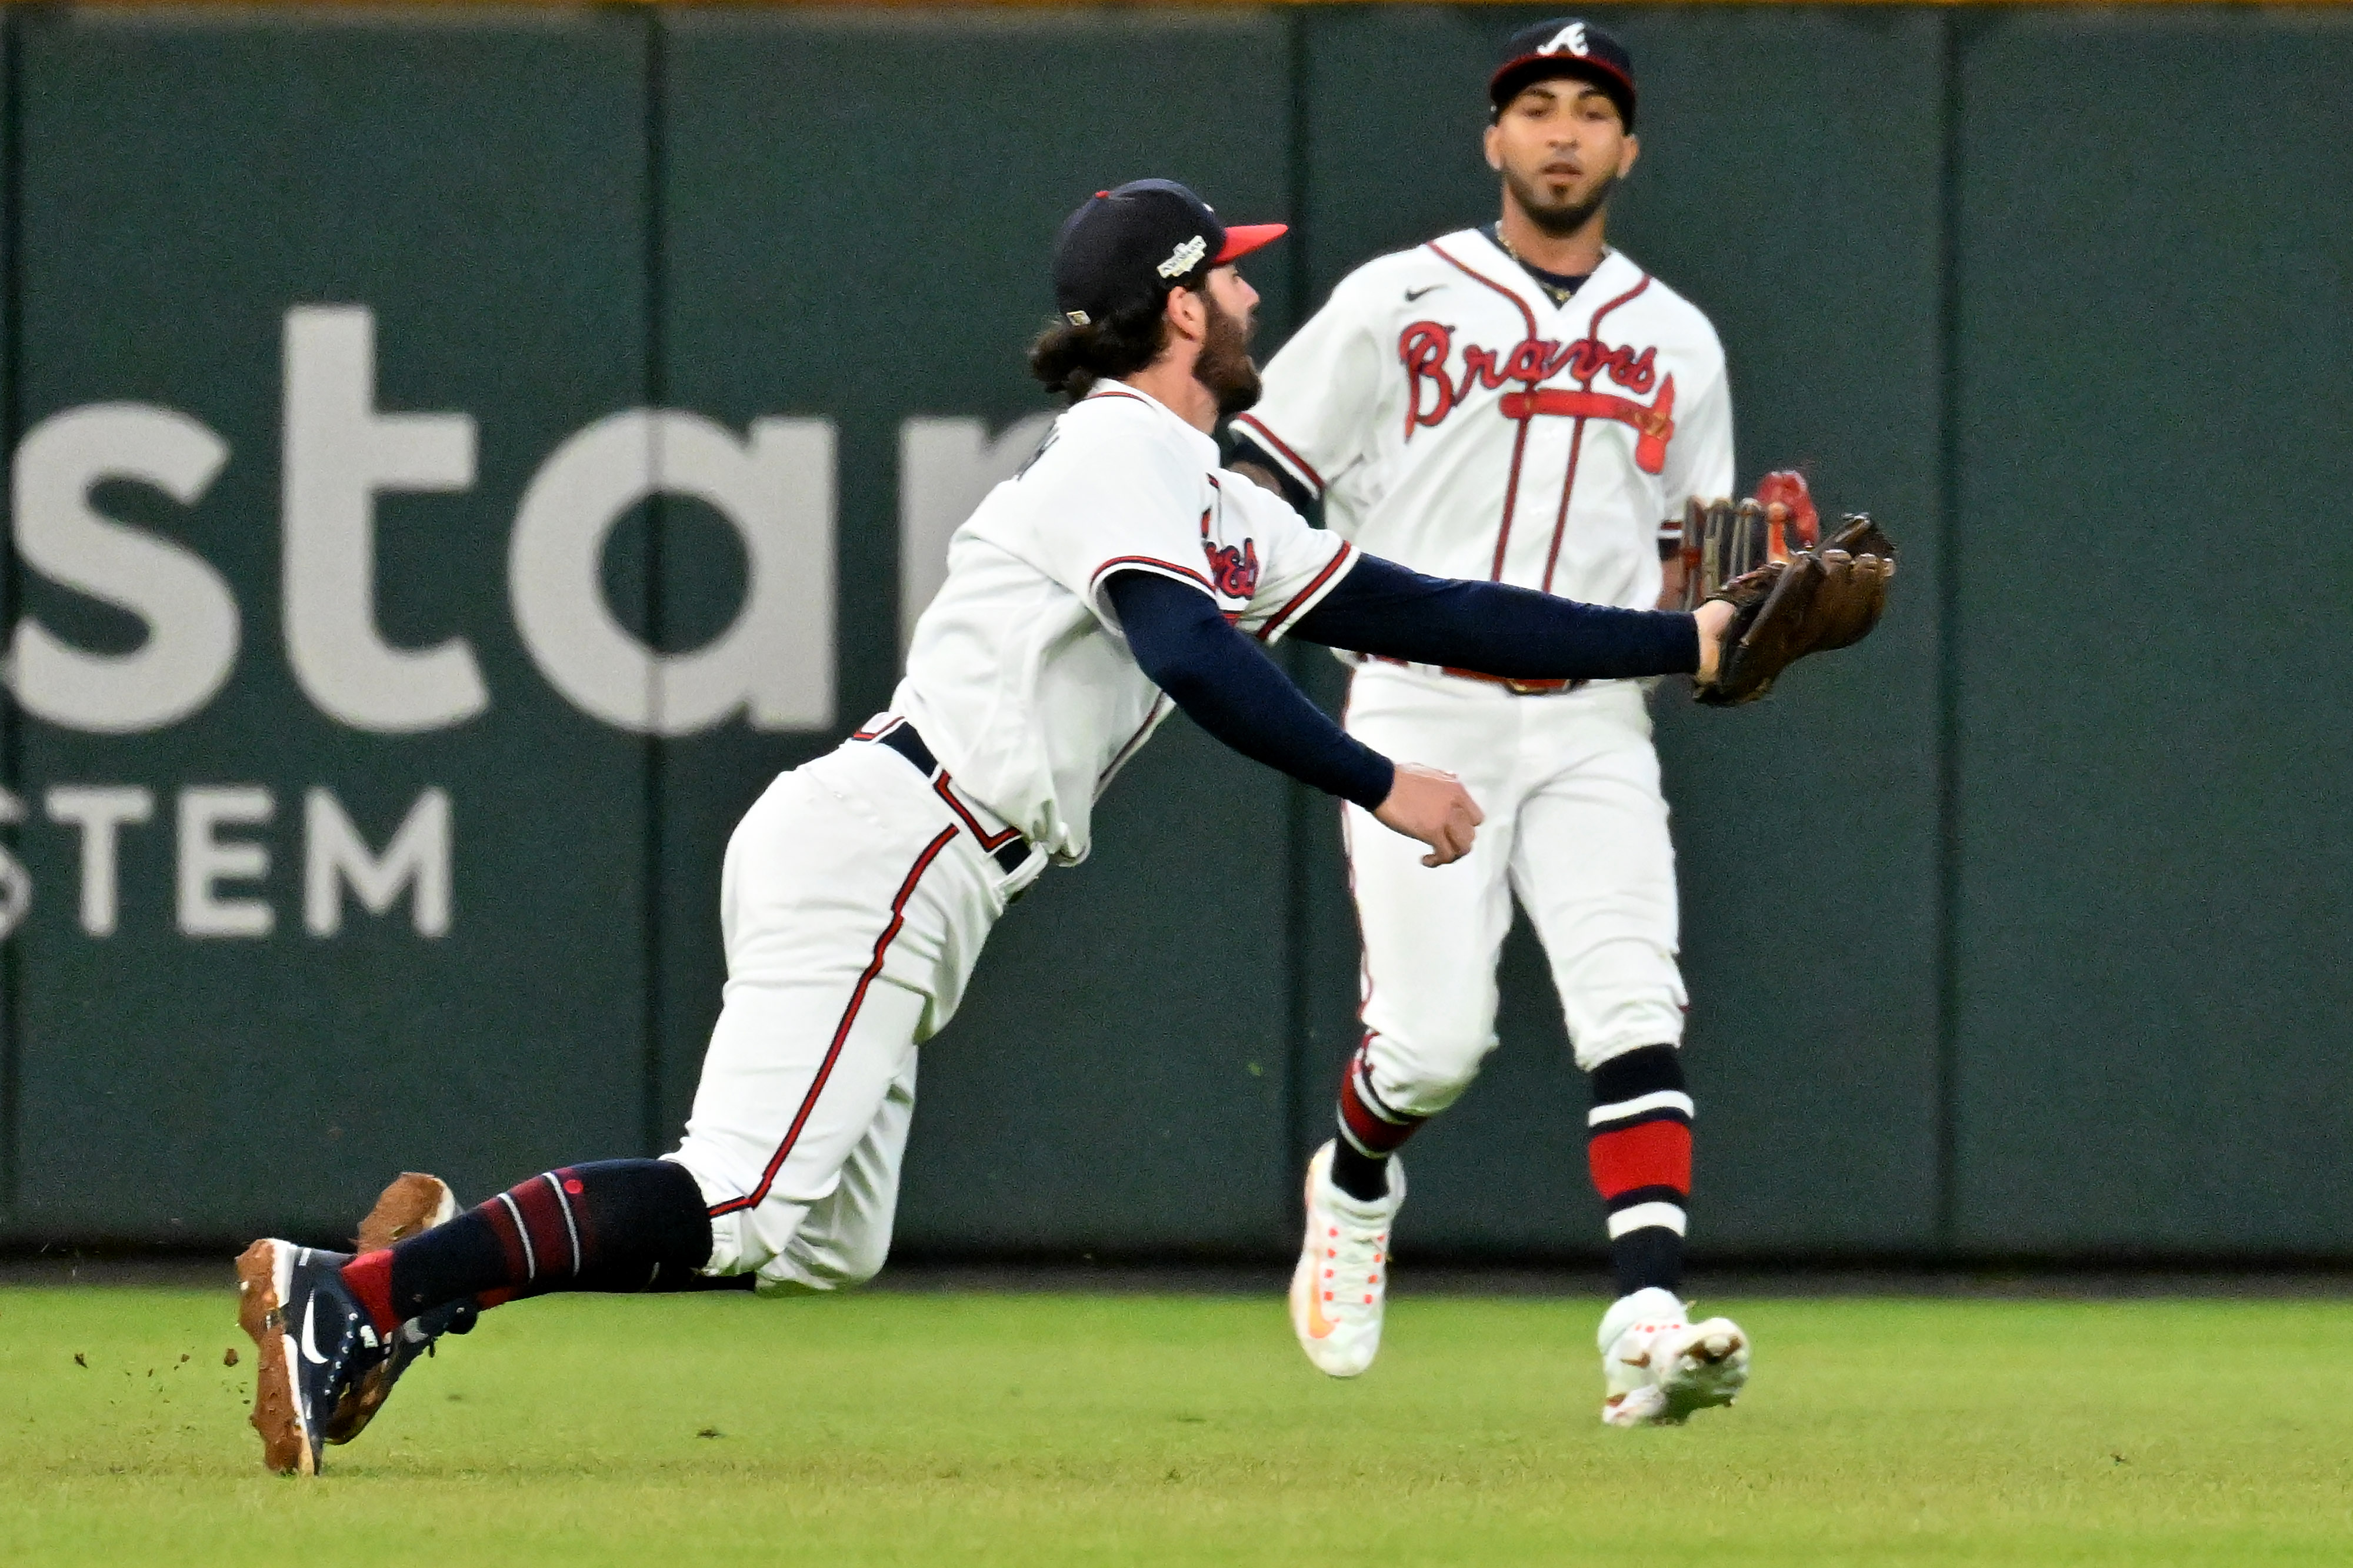 Athletes in Action - Congrats to Dansby Swanson and the Atlanta Braves on  winning the World Series! #faith #Jesus #baseball